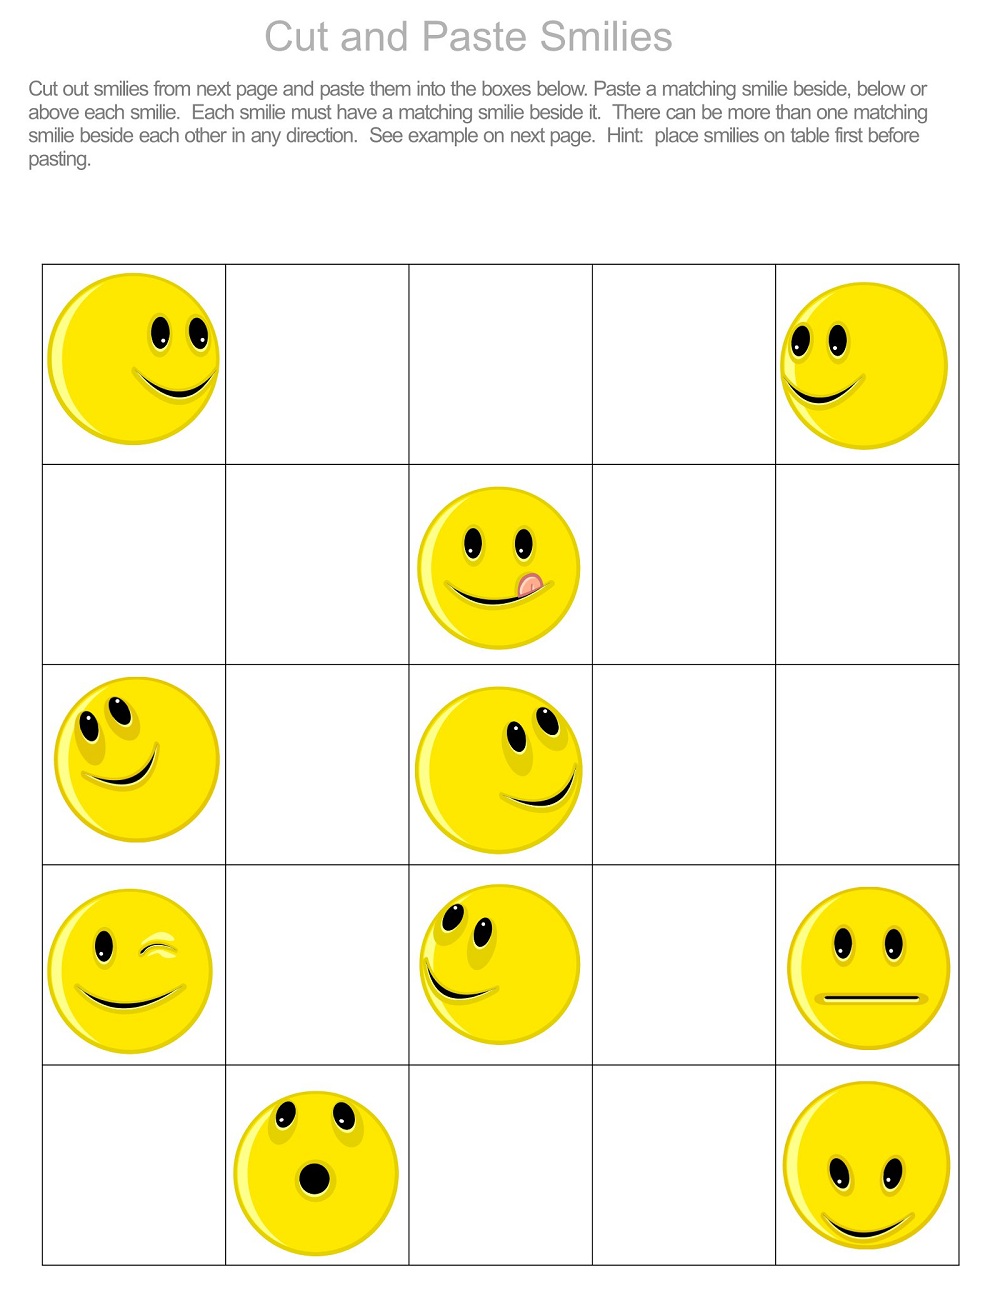 Cut and Paste Smilies Puzzle